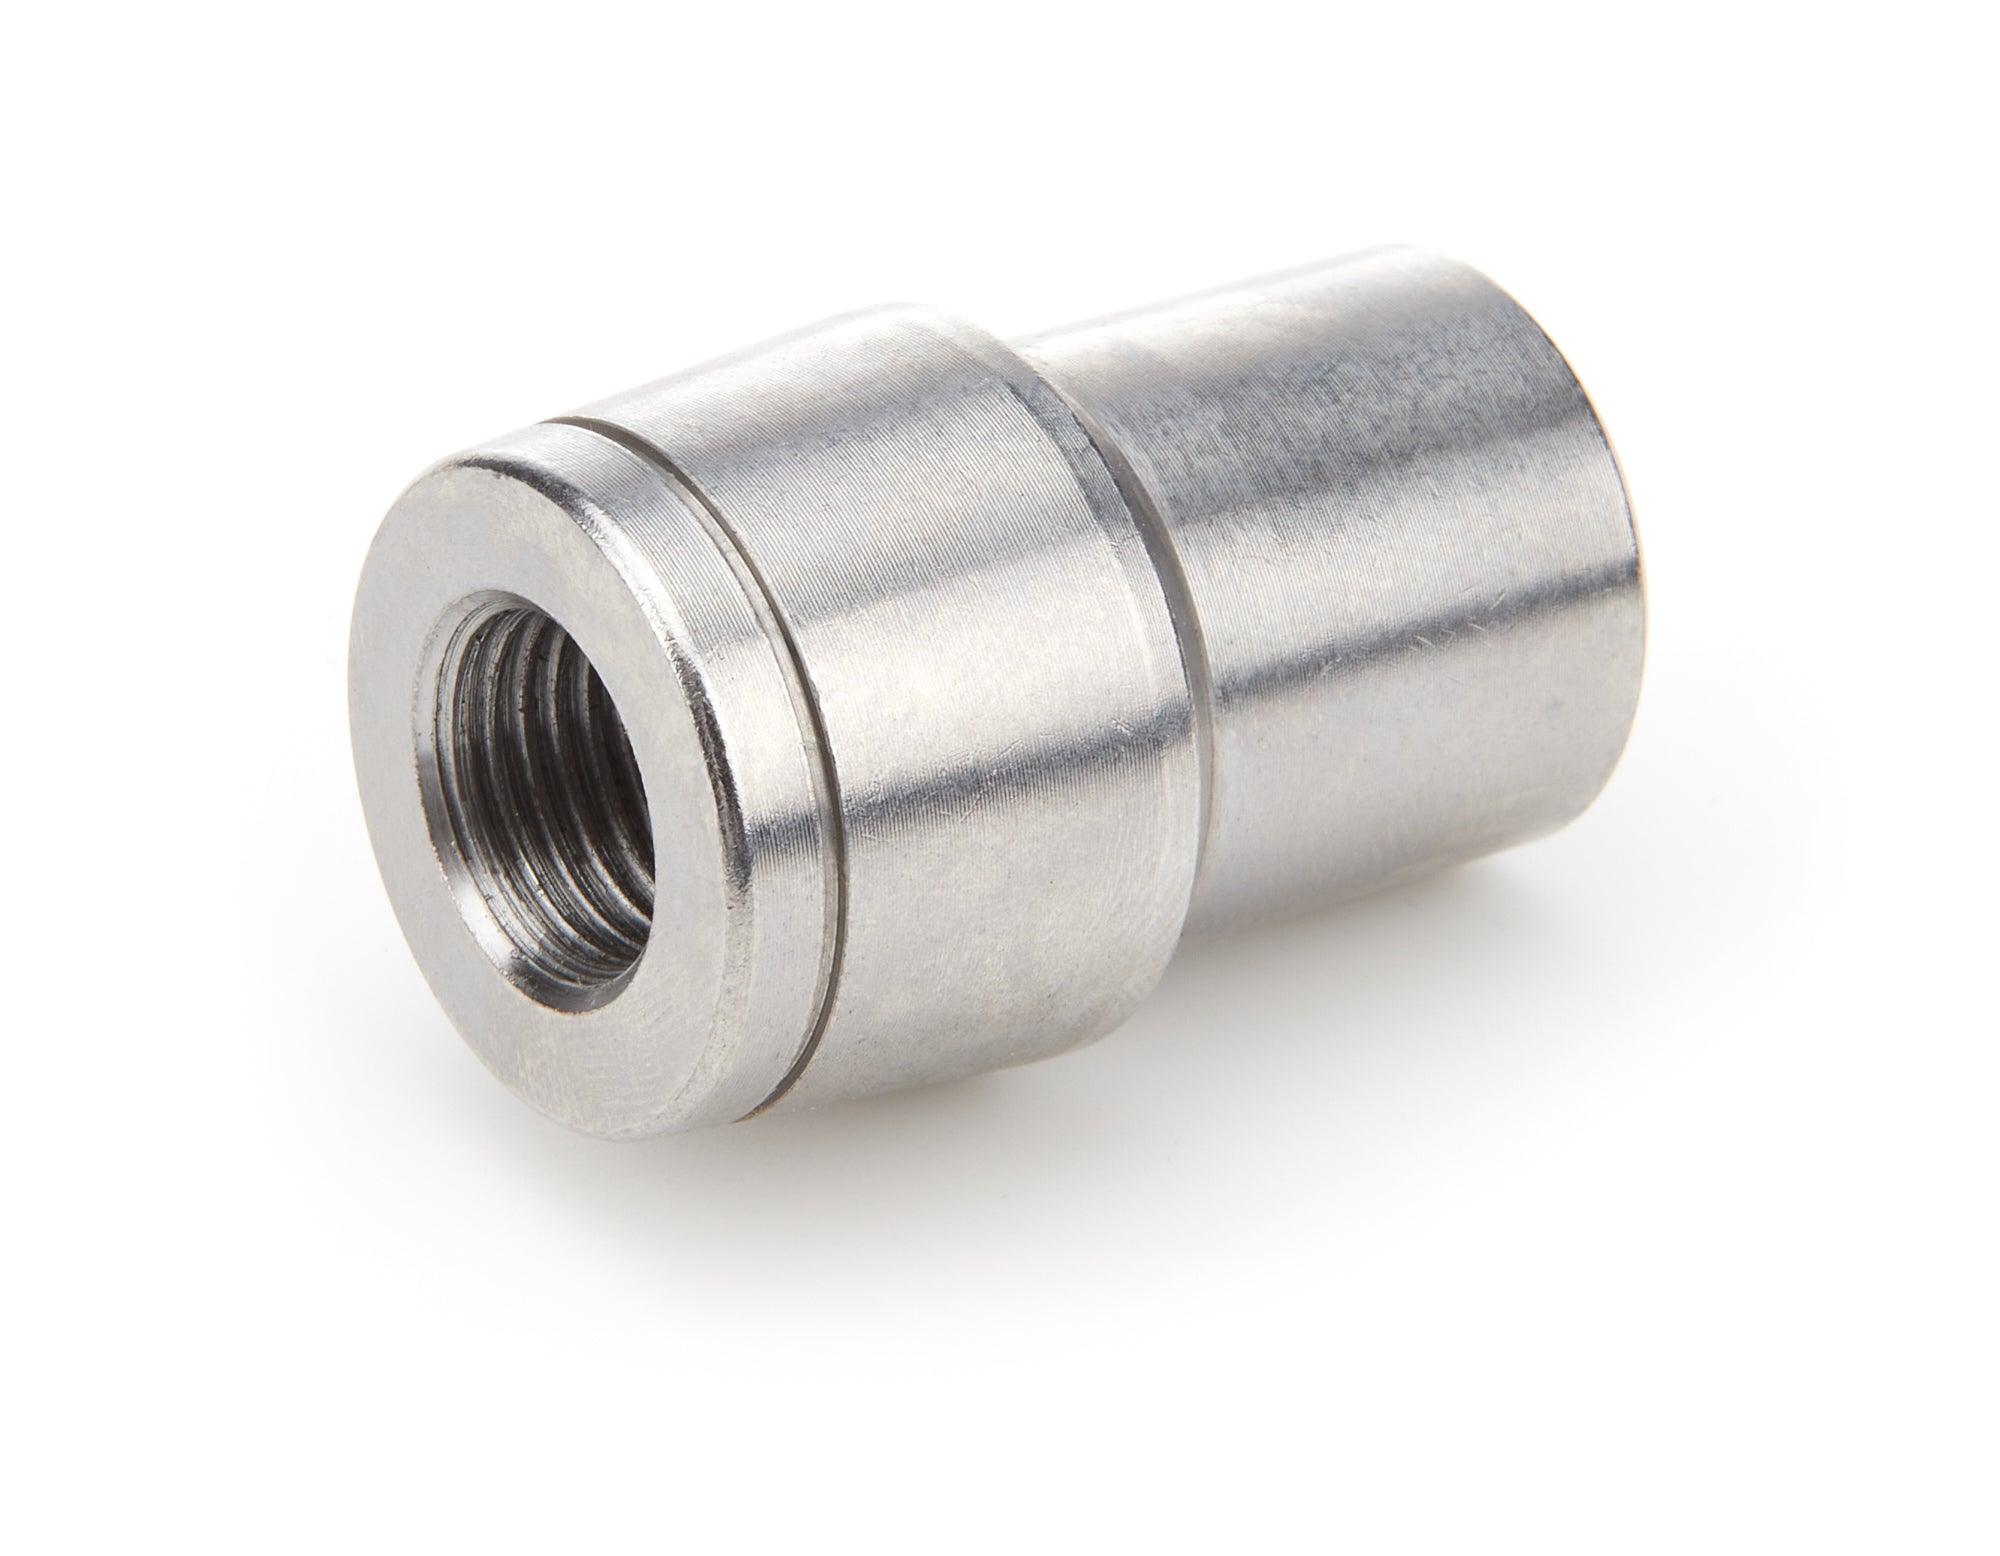 Weld-In Tube End 1/2-20 LH 1in x .083 - Burlile Performance Products